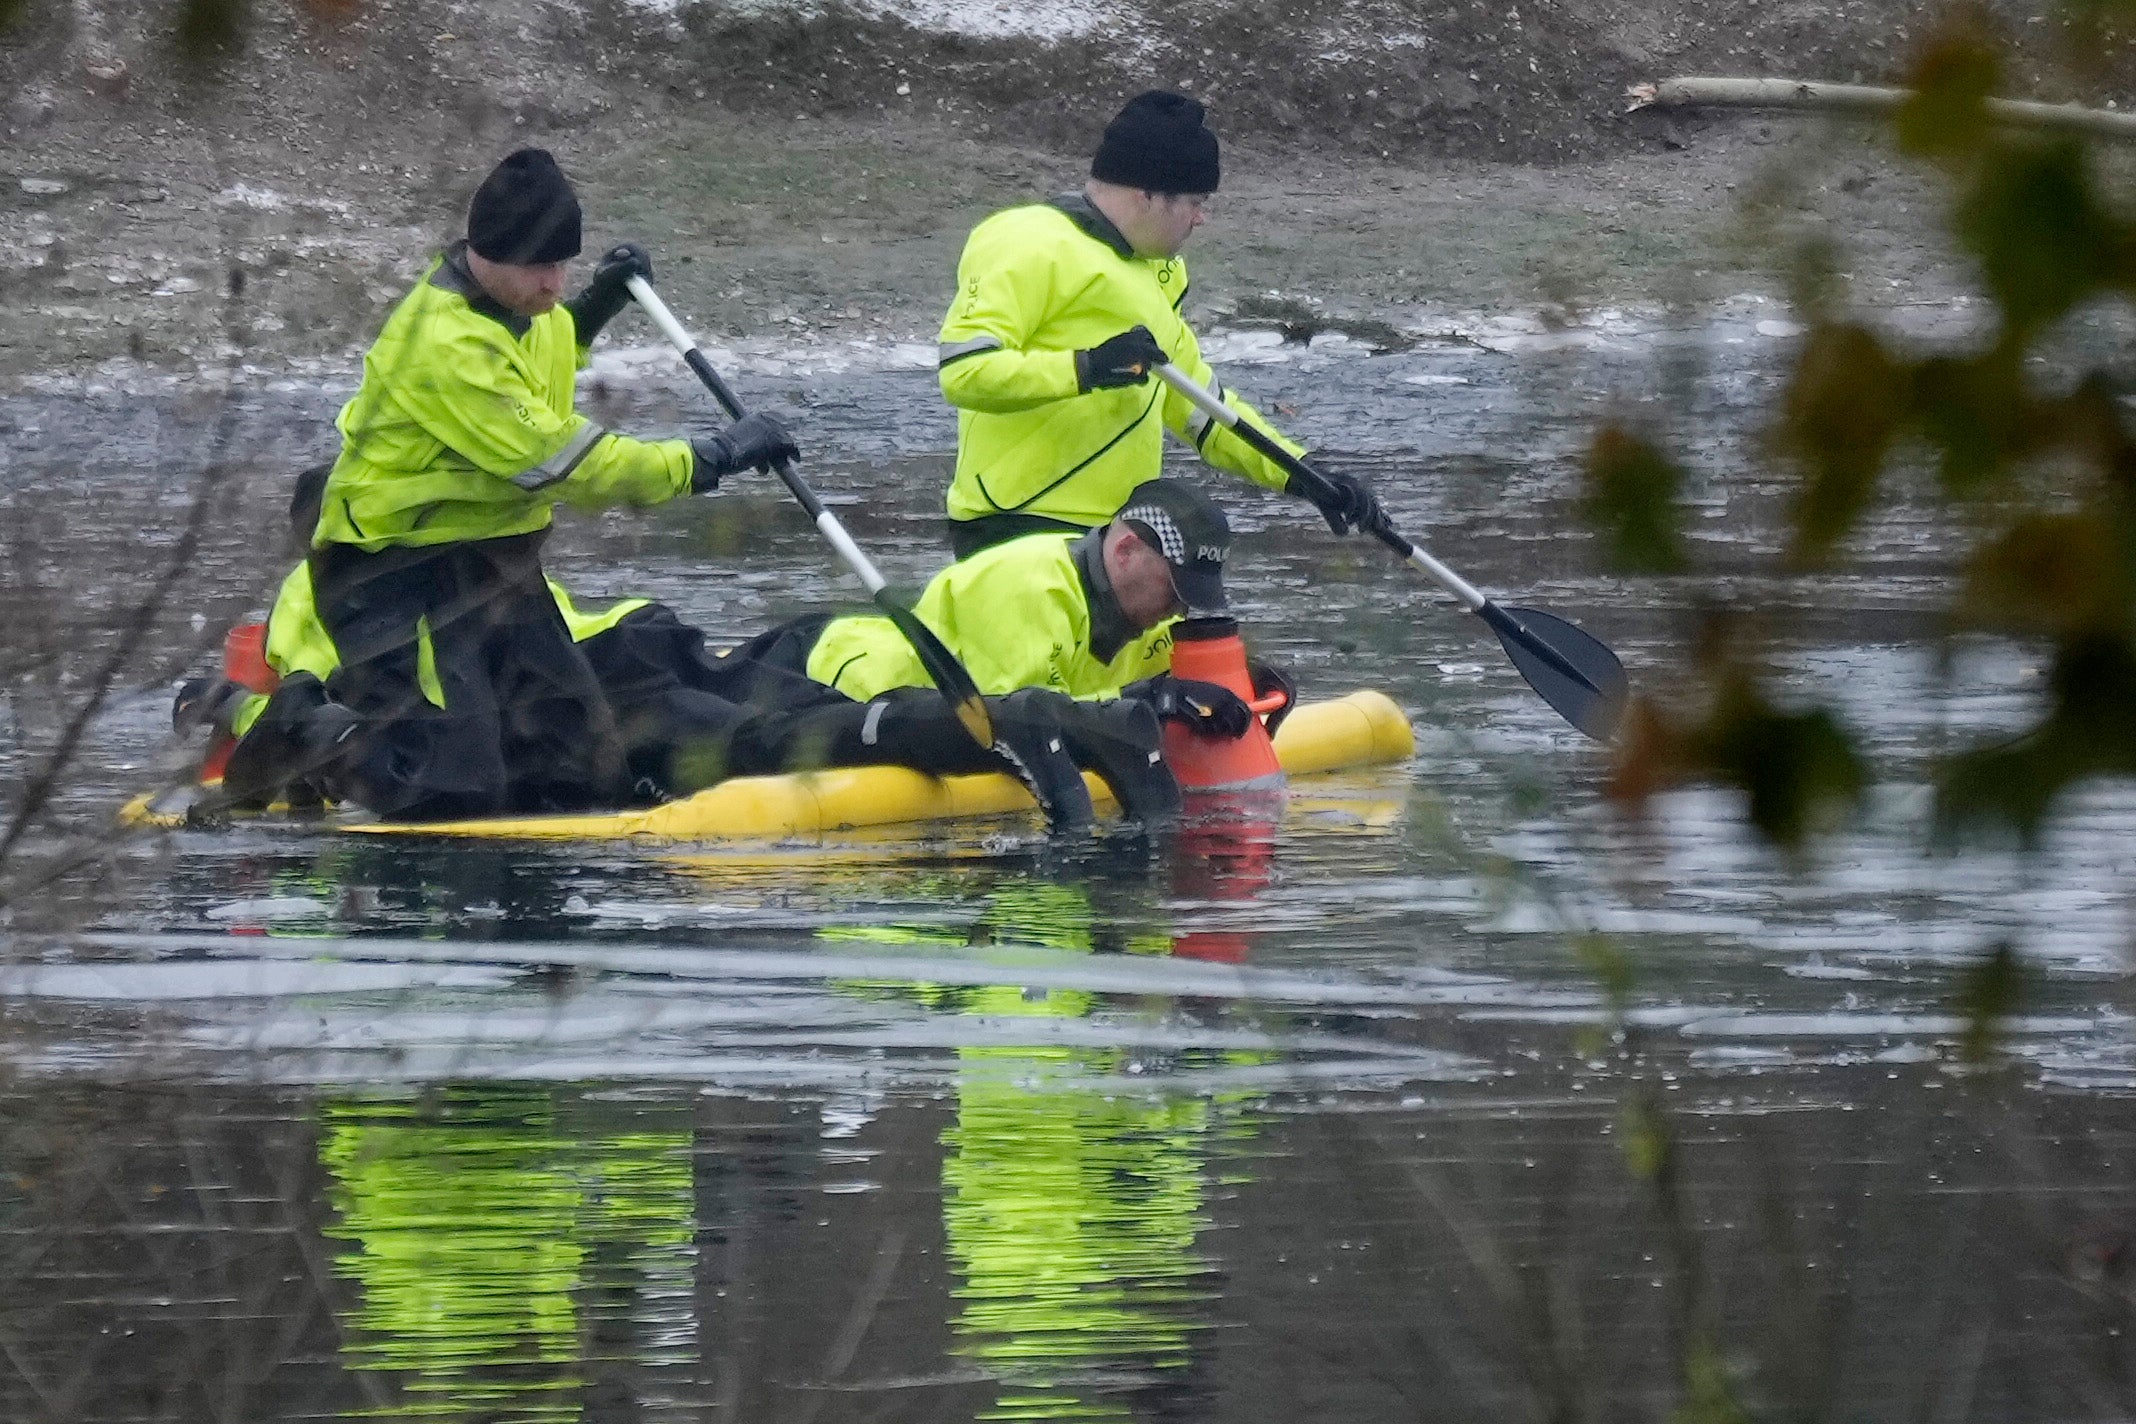 Search efforts continued the day after the tragedy